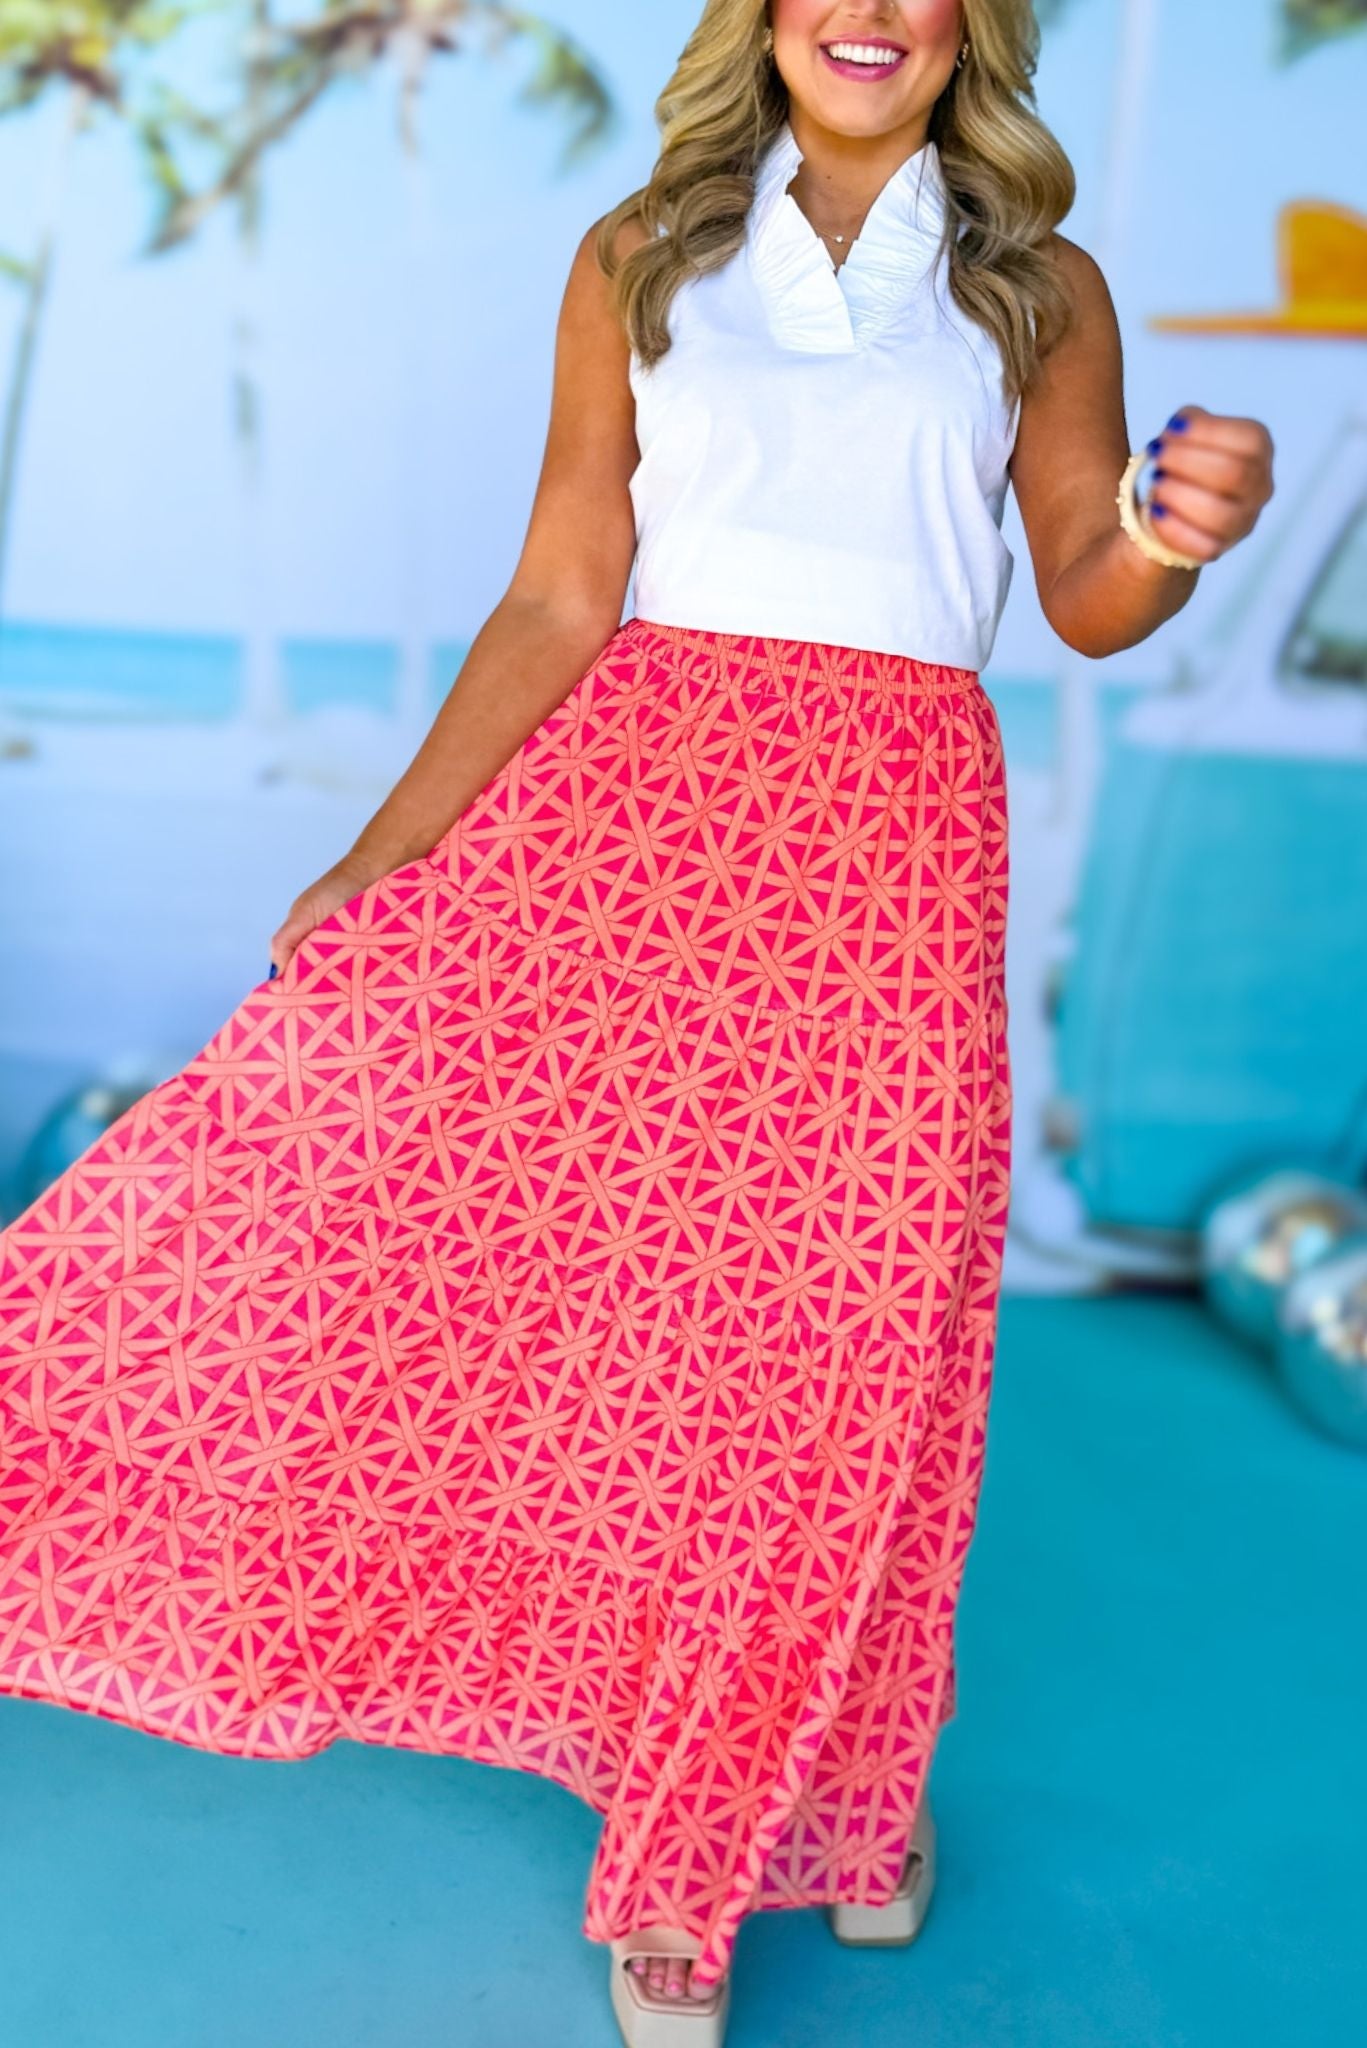 SSYS The Sadie Maxi Skirt In Pink Orange Lattice, ssys the label, spring break skirt, spring break style, spring fashion affordable fashion, elevated style, bright style, printed skirt, mom style, shop style your senses by mallory fitzsimmons, ssys by mallory fitzsimmons